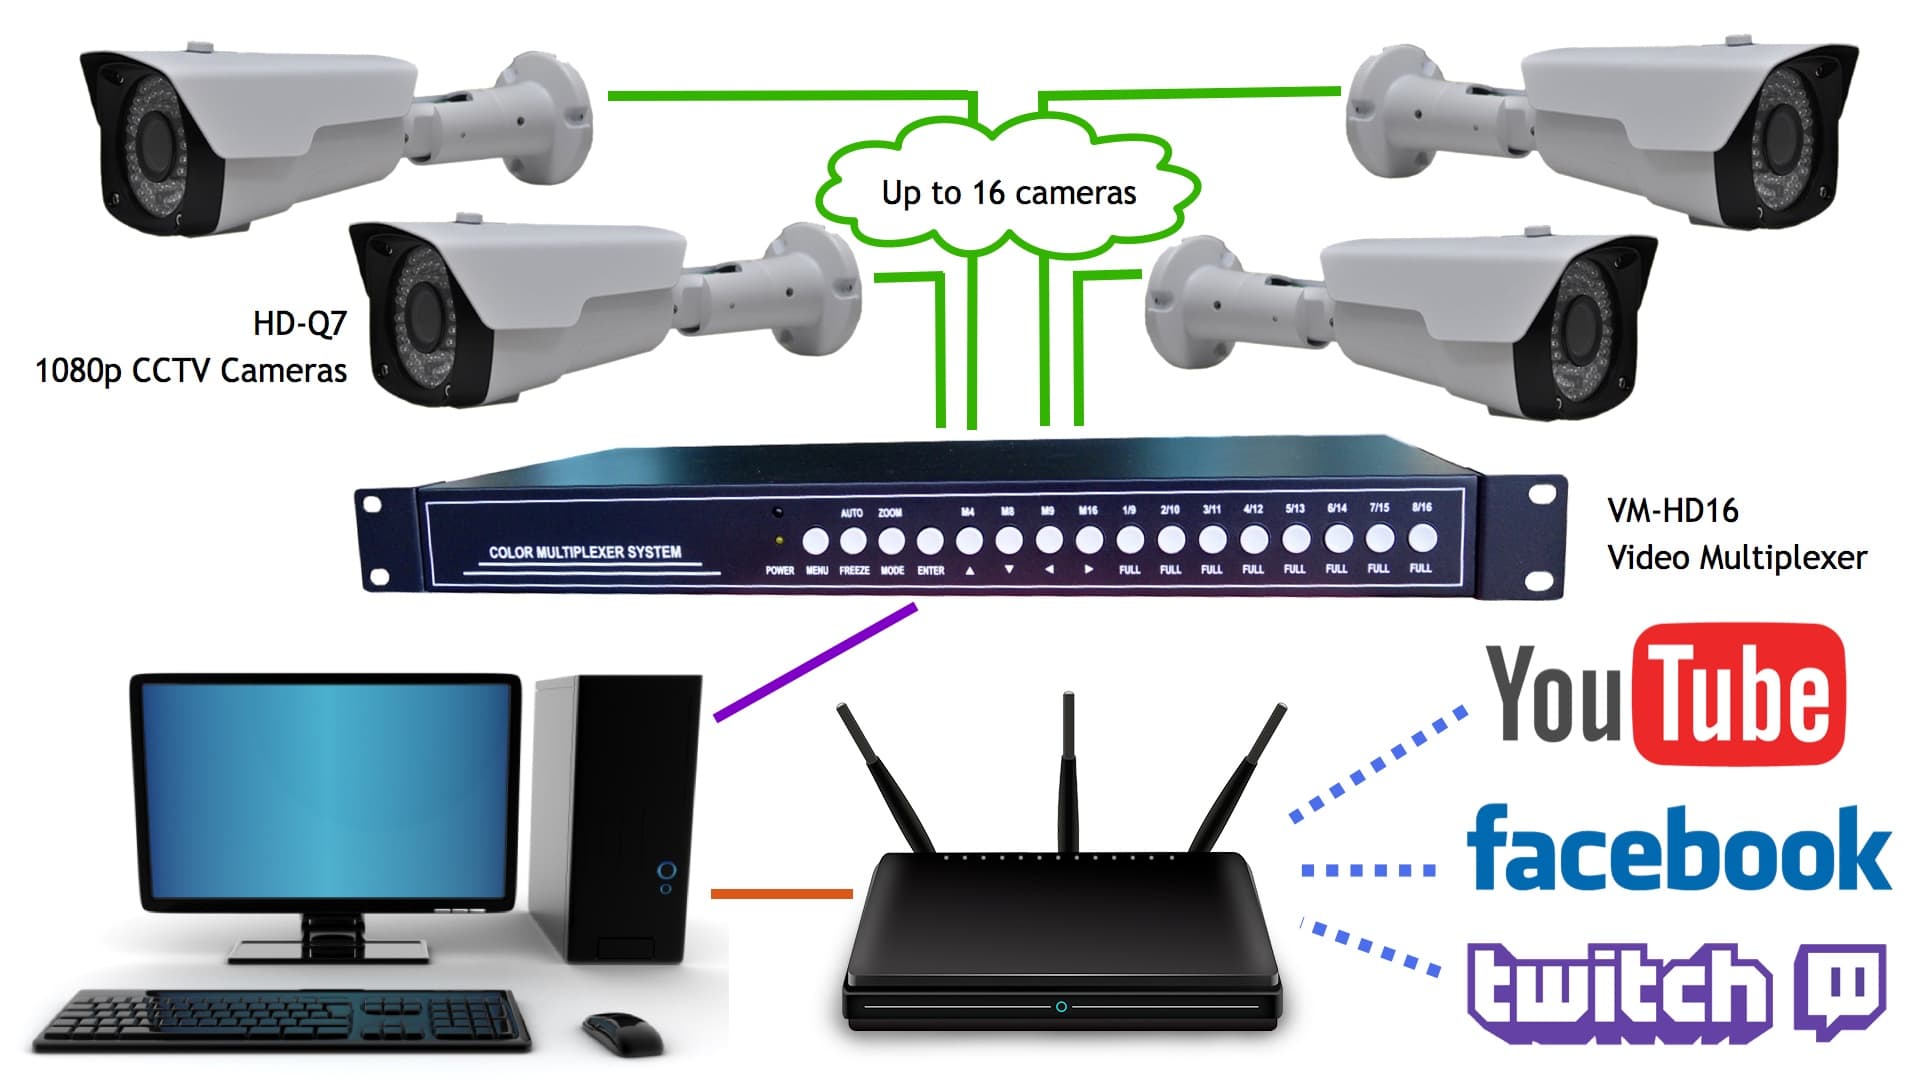 Streaming system